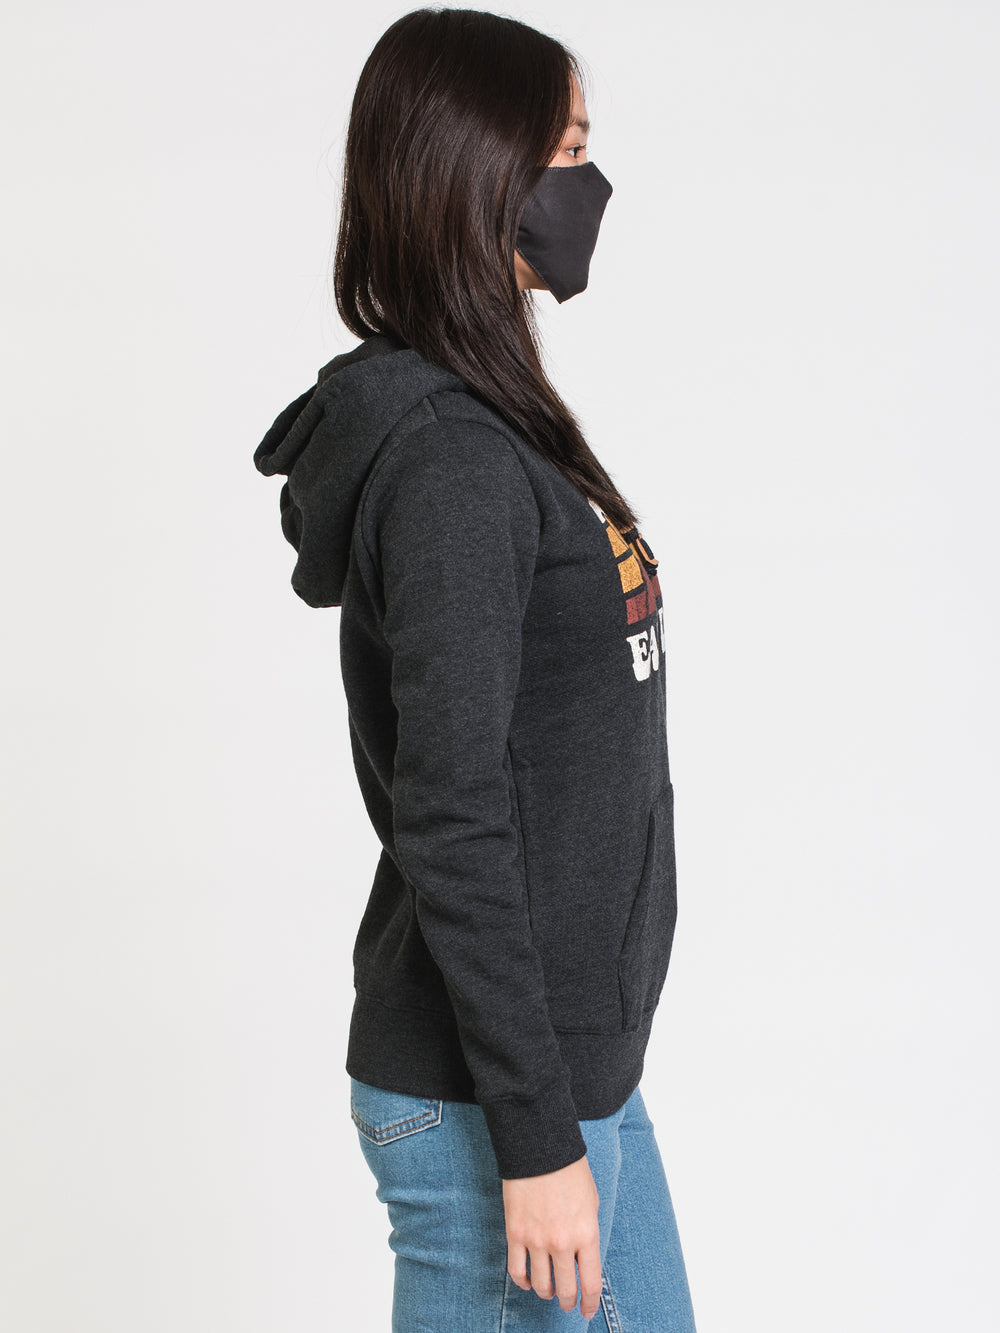 TENTREE EARTH DAZE PULLOVER HOODIE  - CLEARANCE